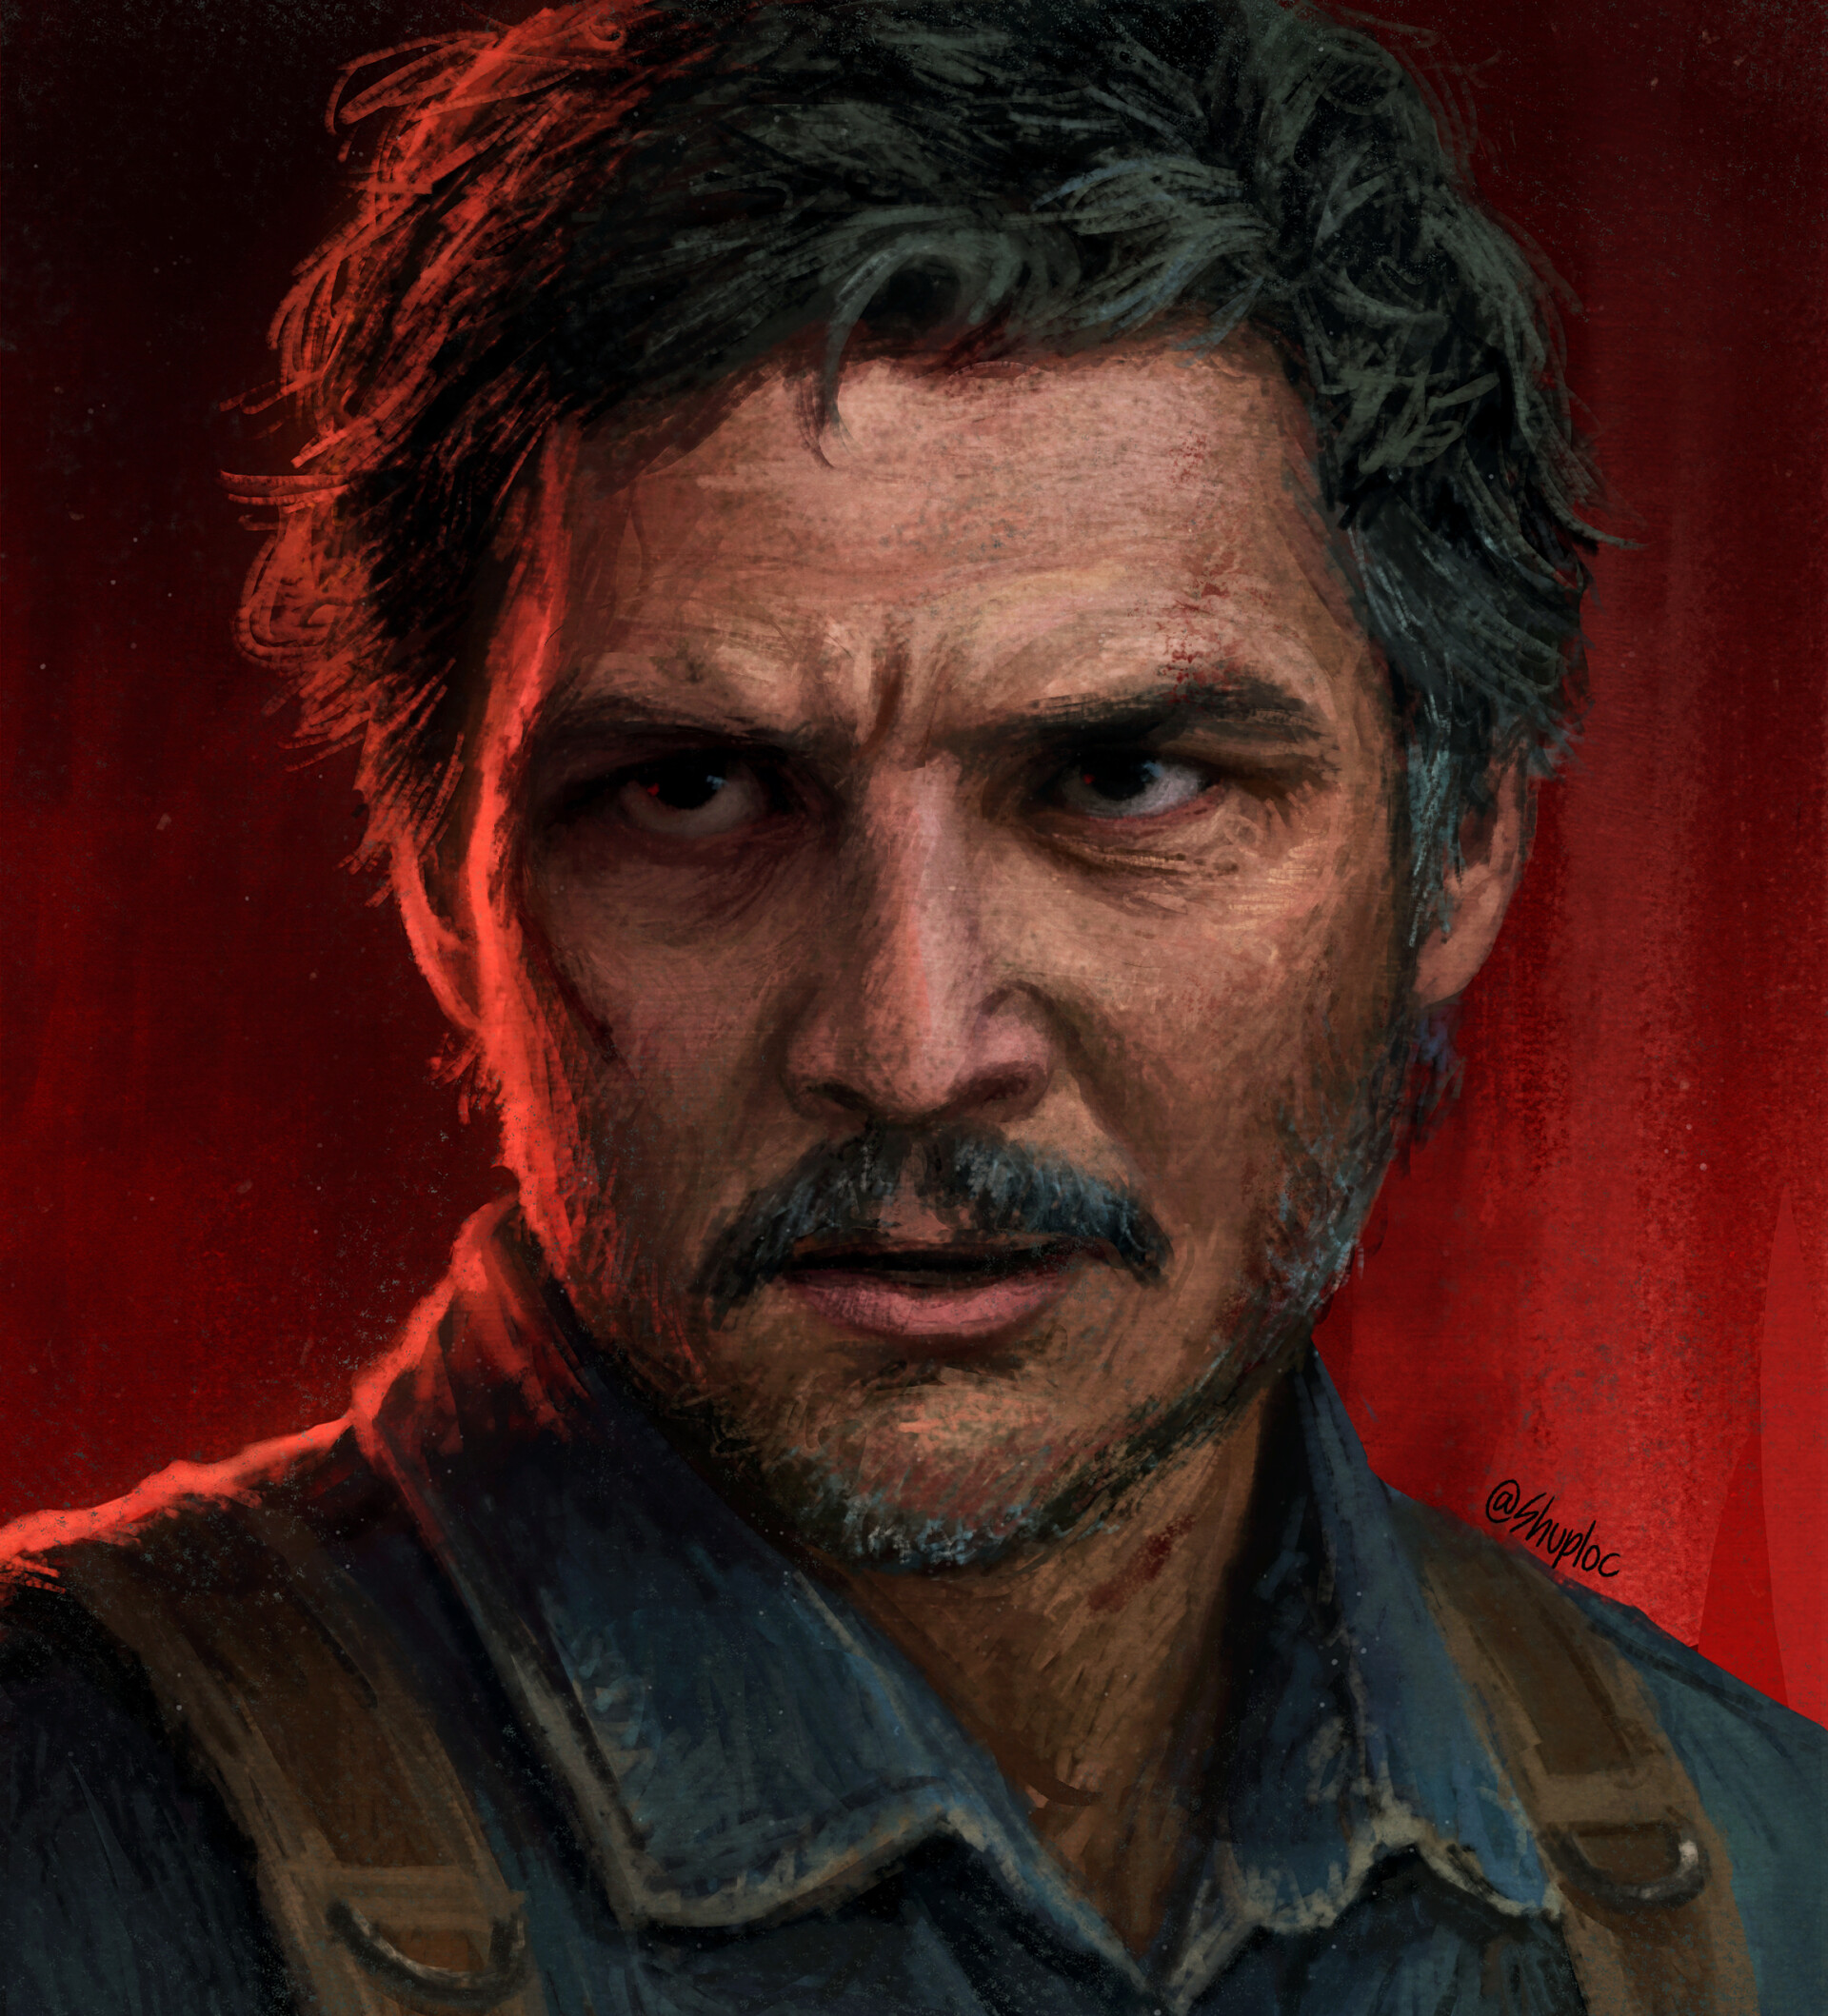 Pedro Pascal Joins HBO's The Last of Us Series as Joel